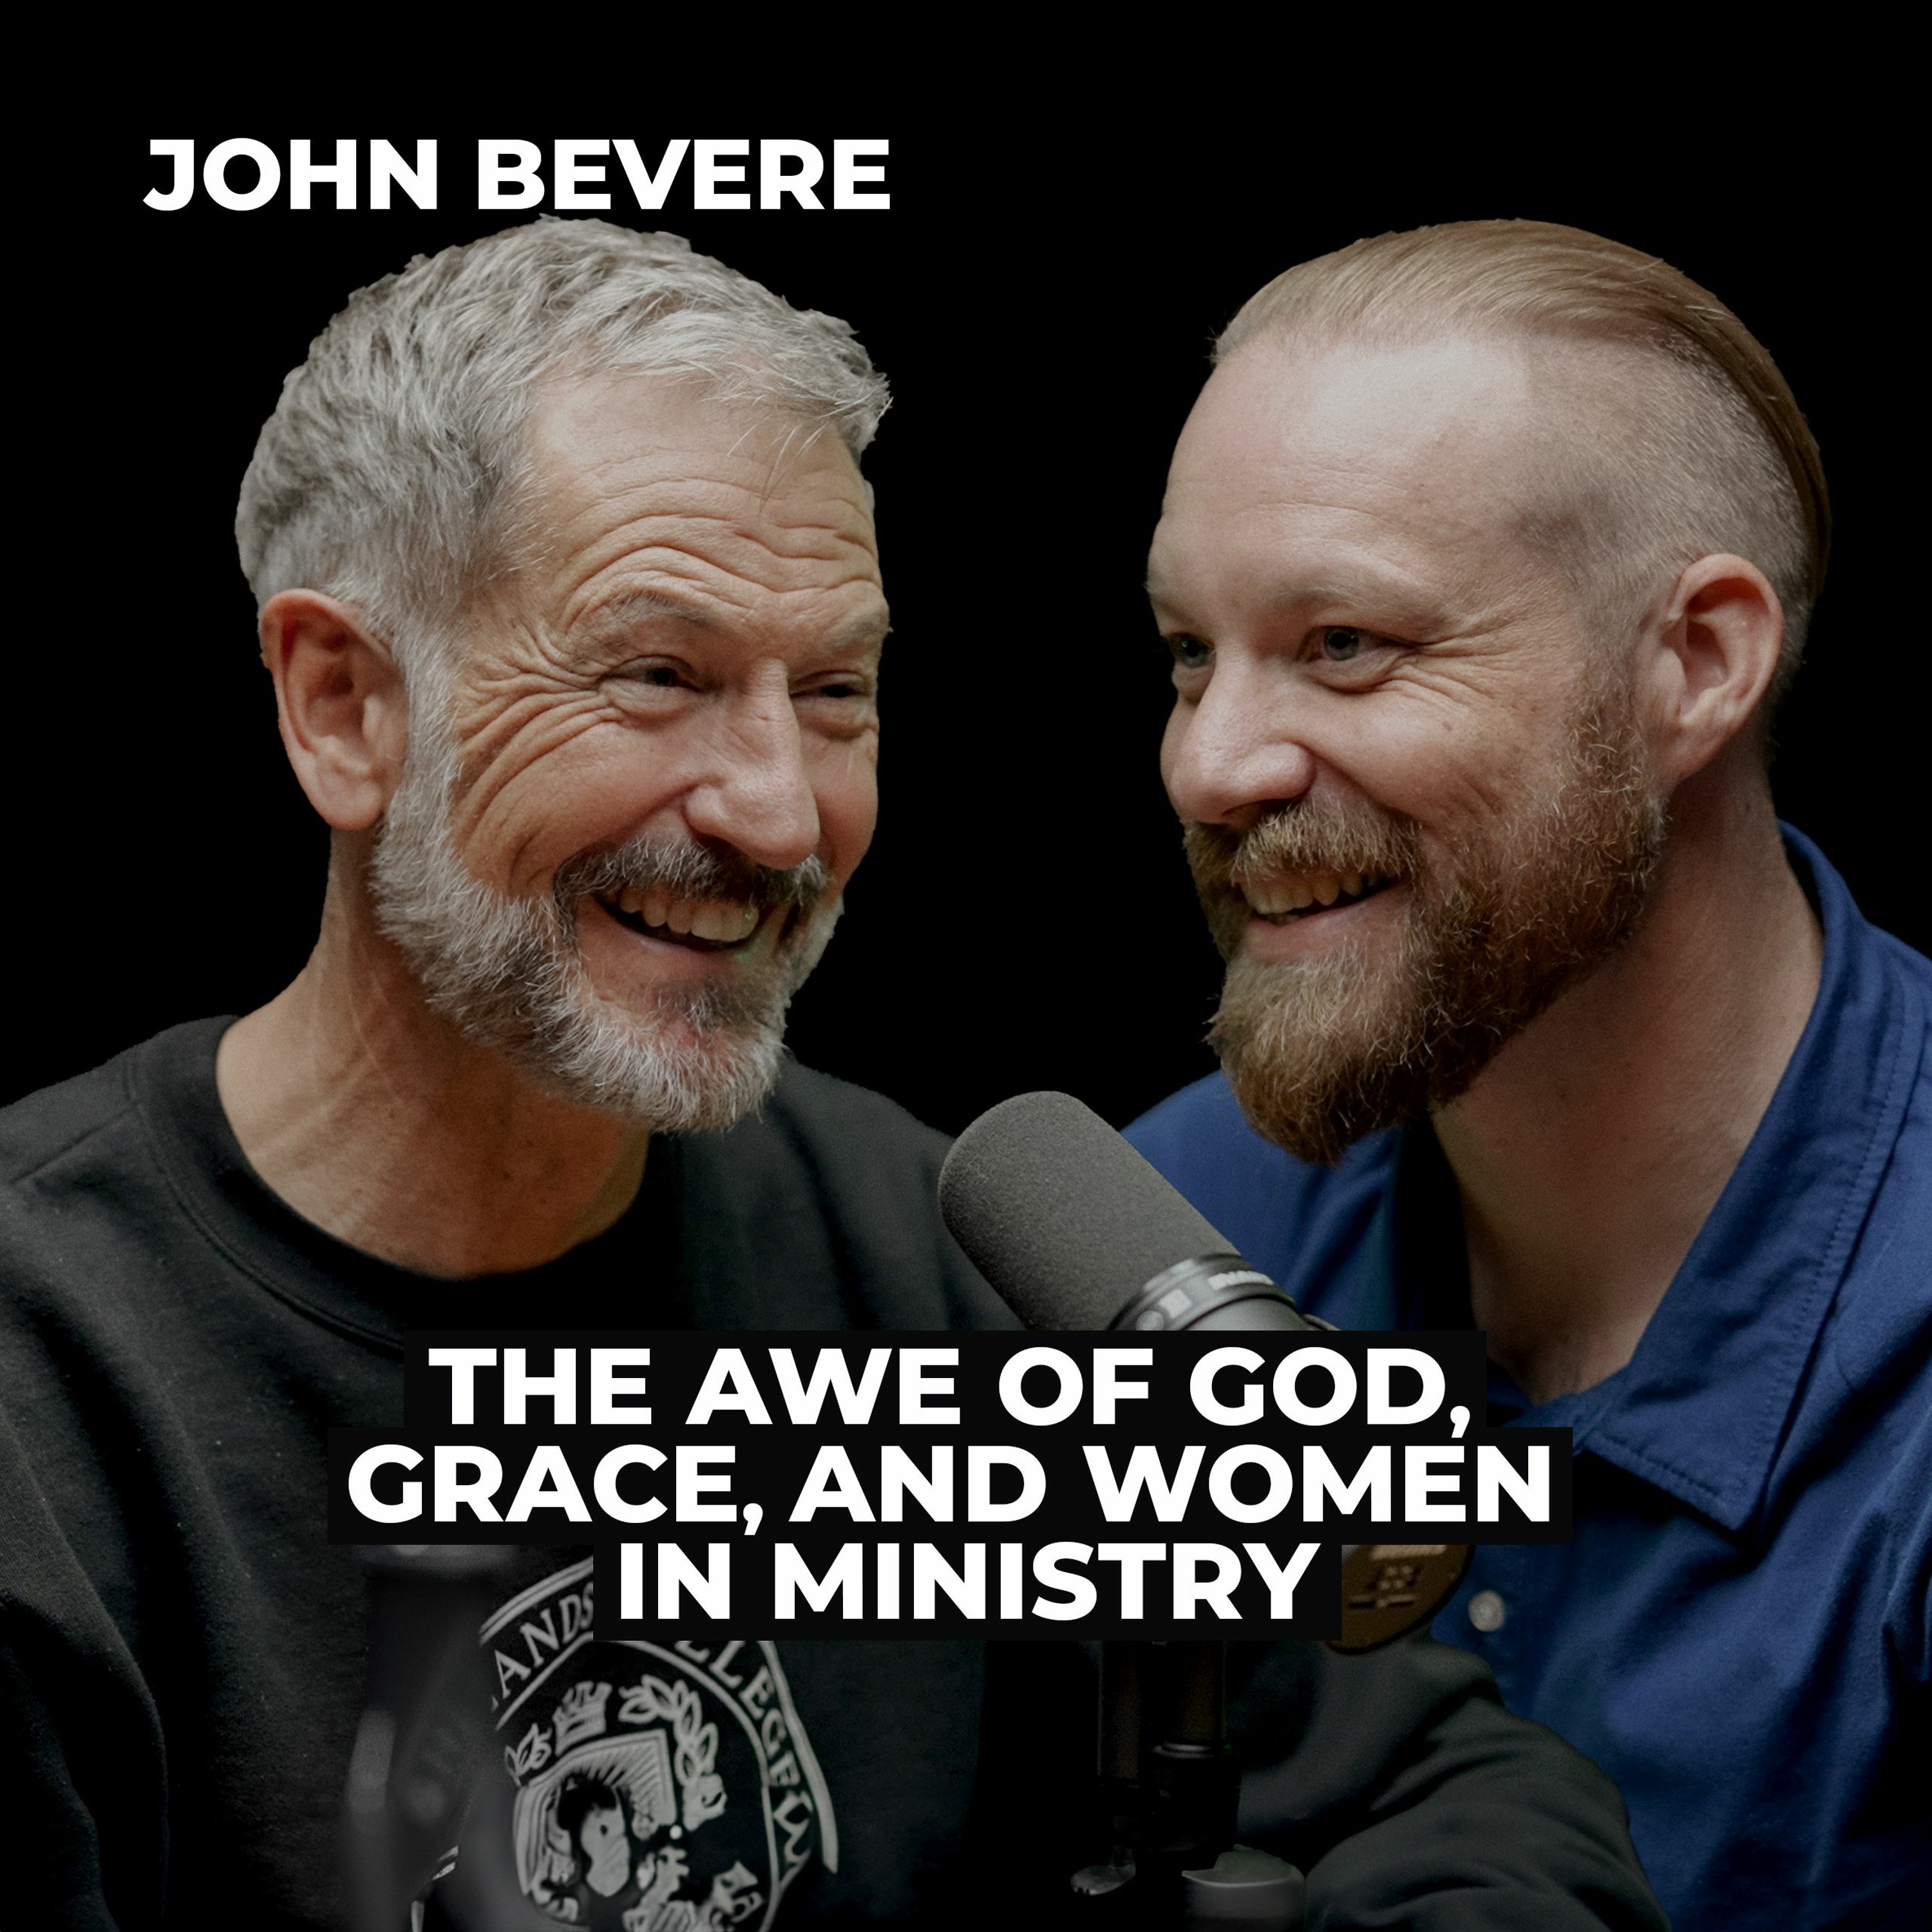 John Bevere: The Awe of God, Grace, and Women in Ministry